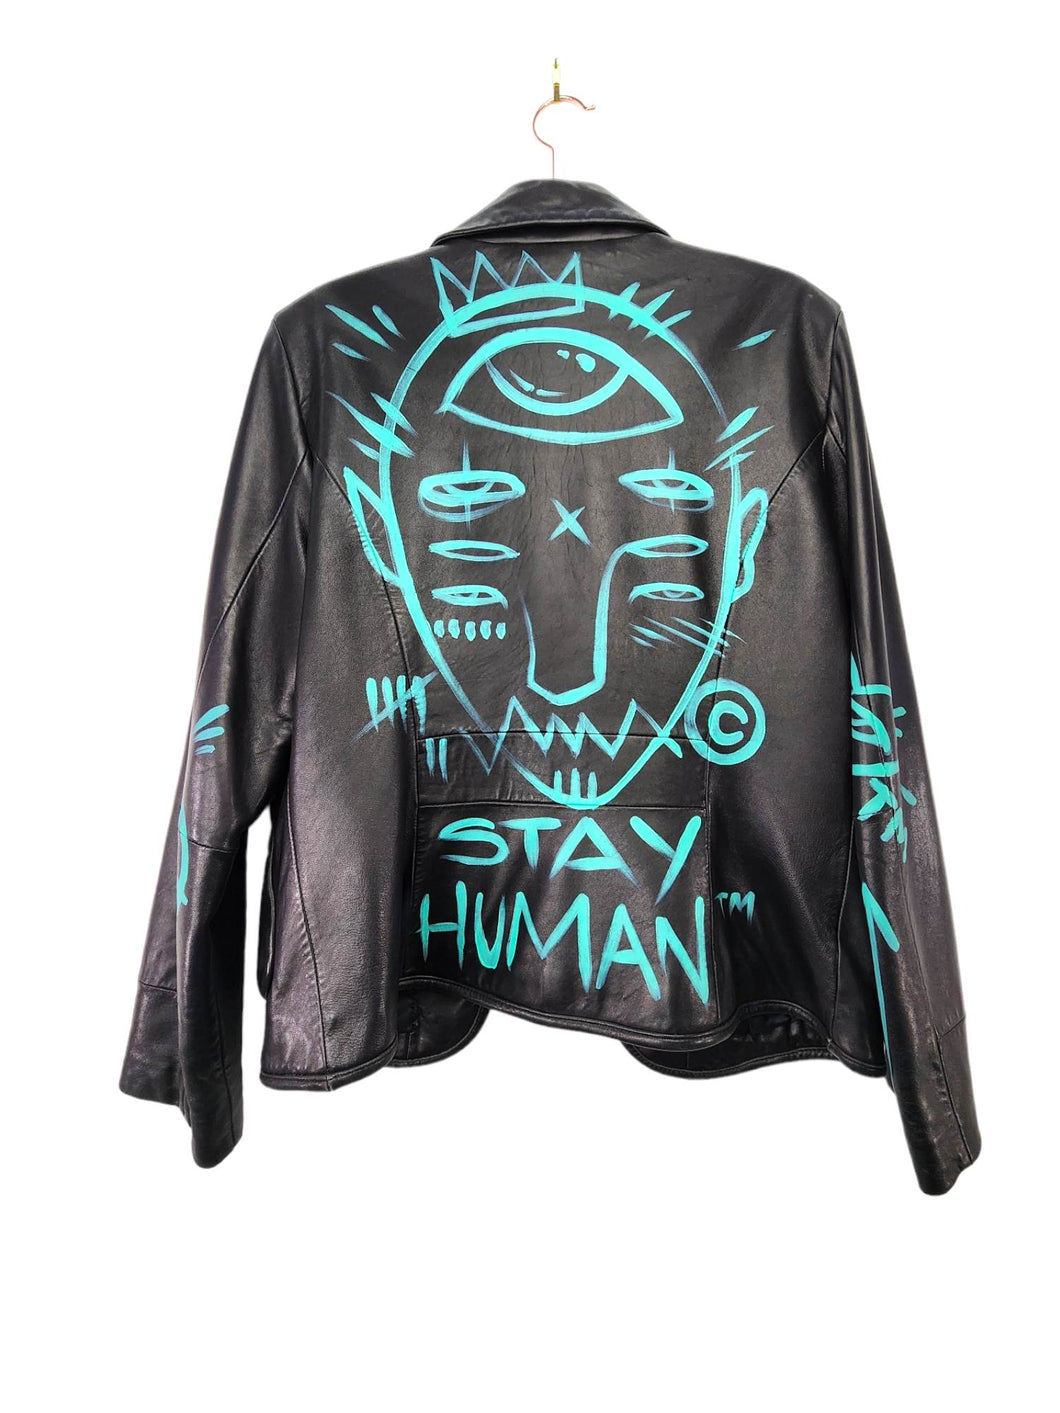 KEEP GOING + STAY HUMAN Leather Coat